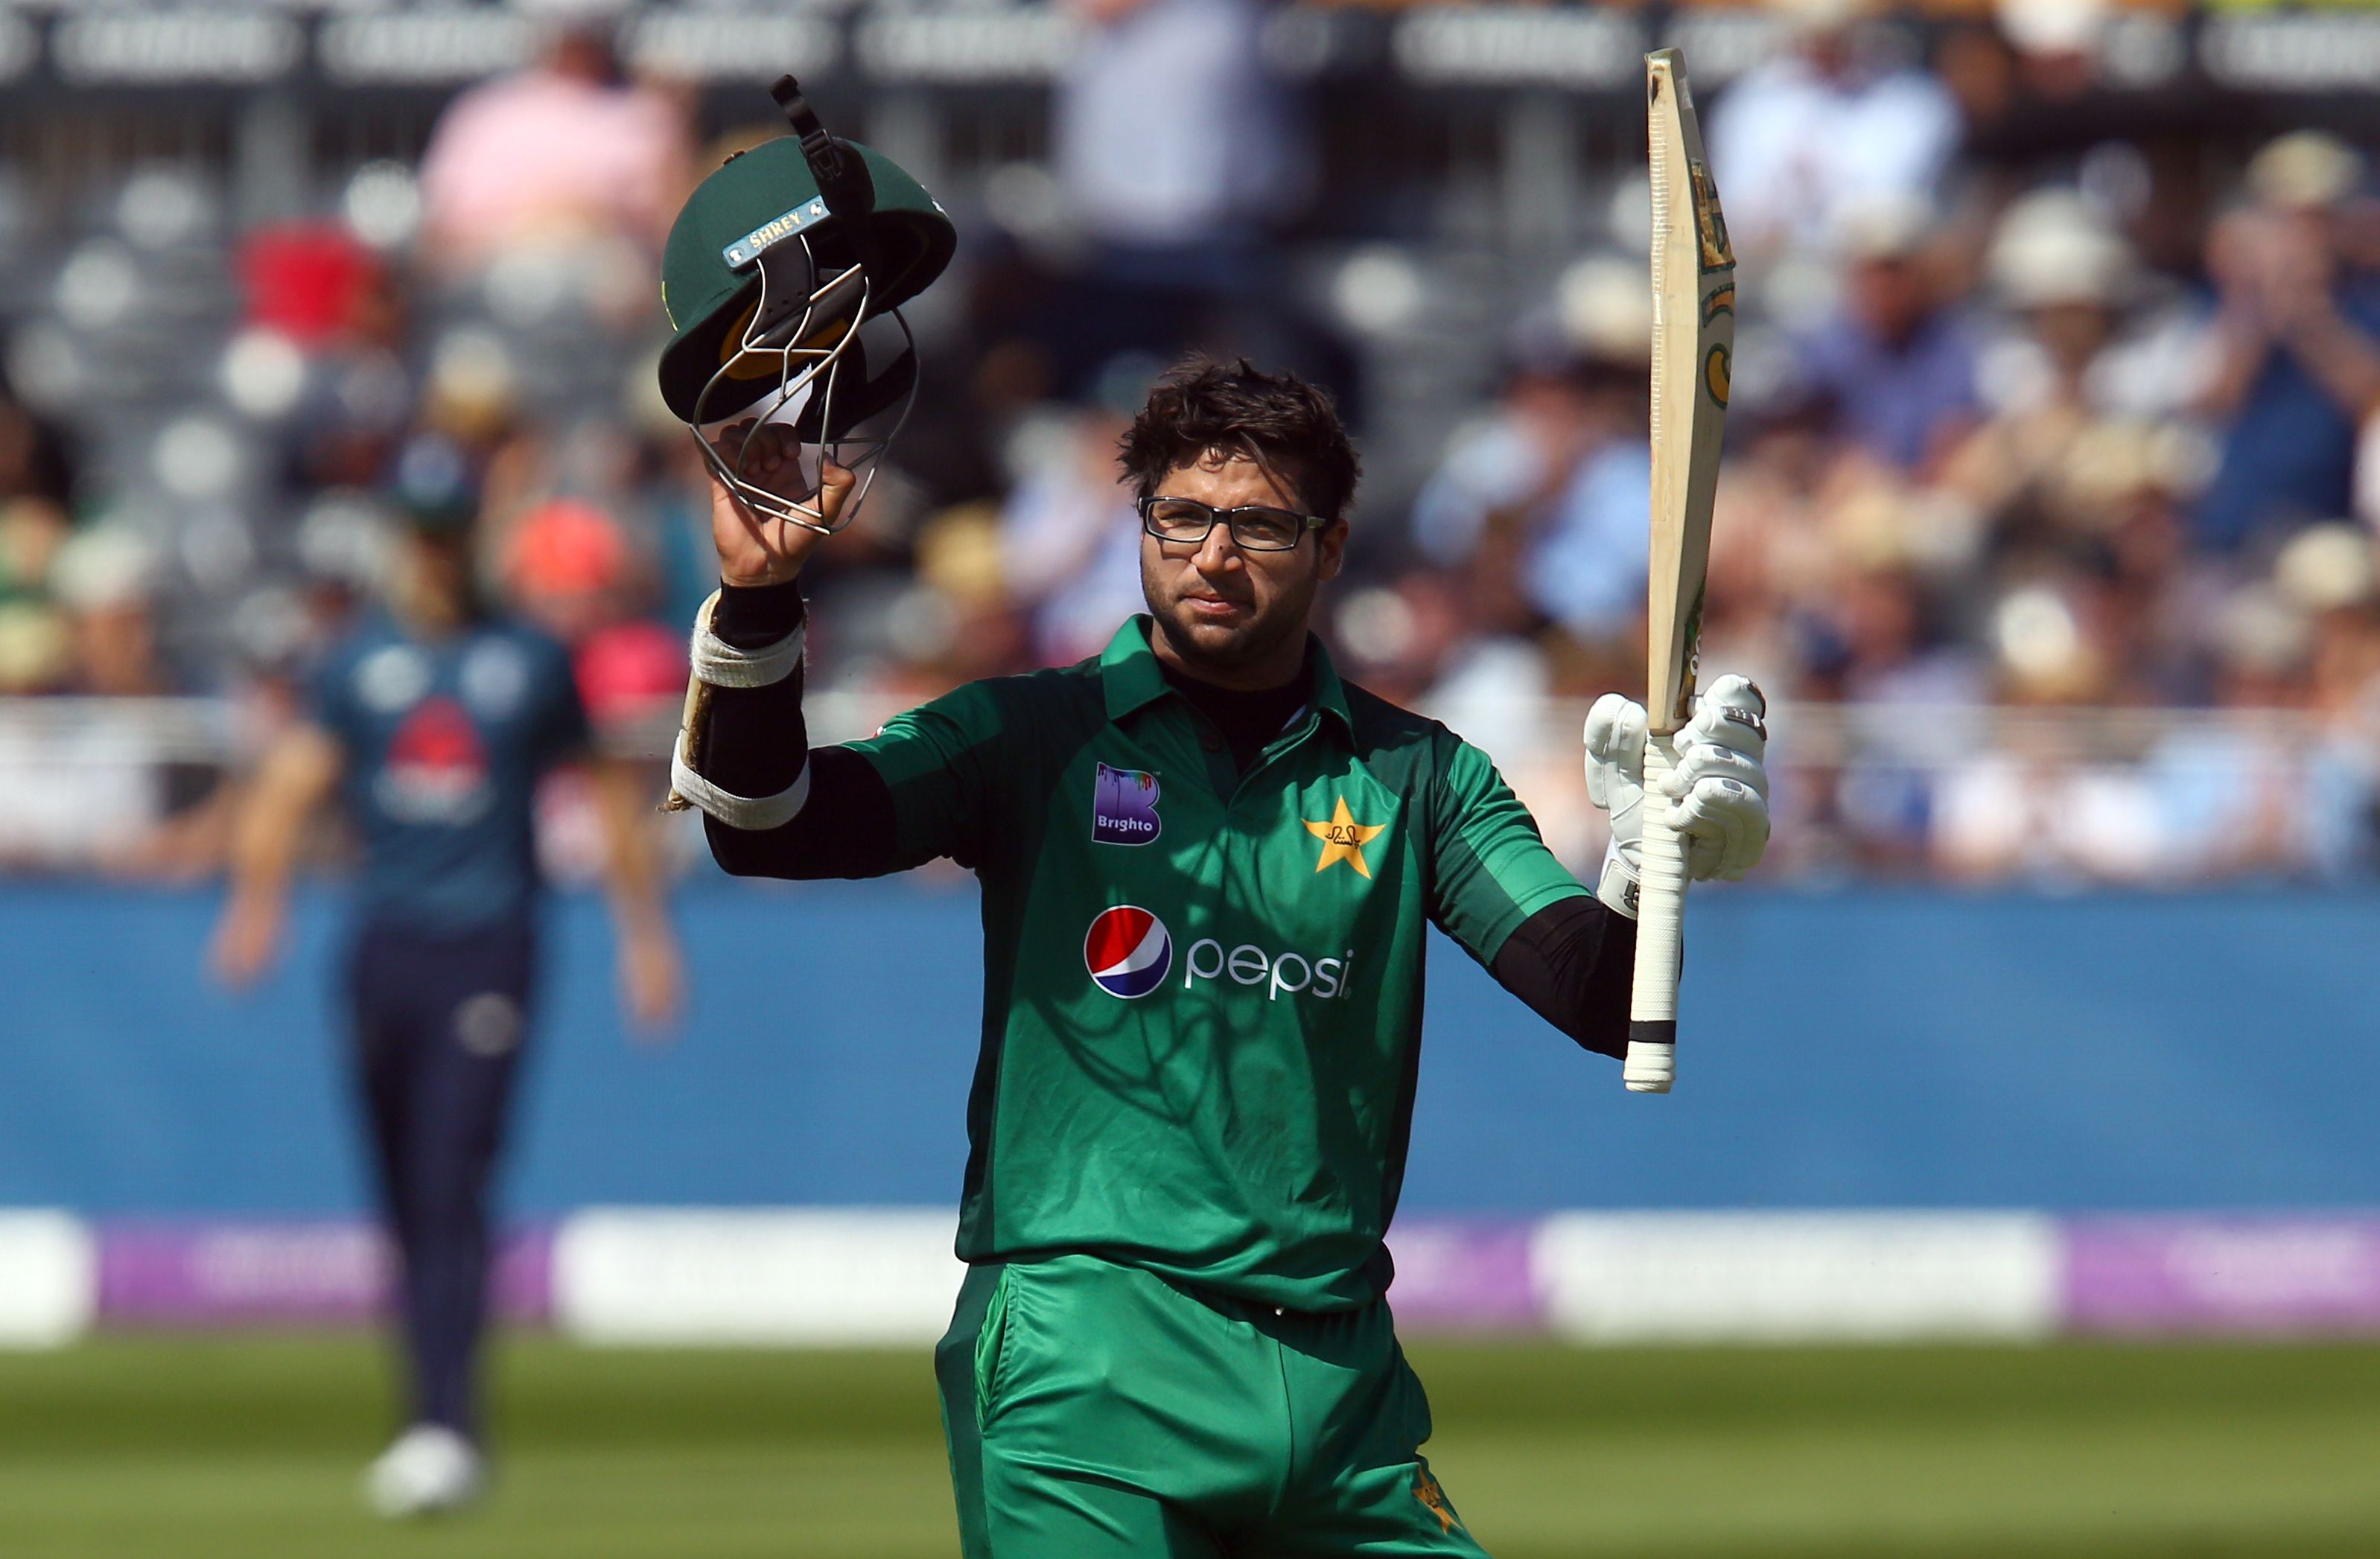 Pak vs SA: Imam-ul-Haq’s participation in team remains 'doubtful' due to old injury